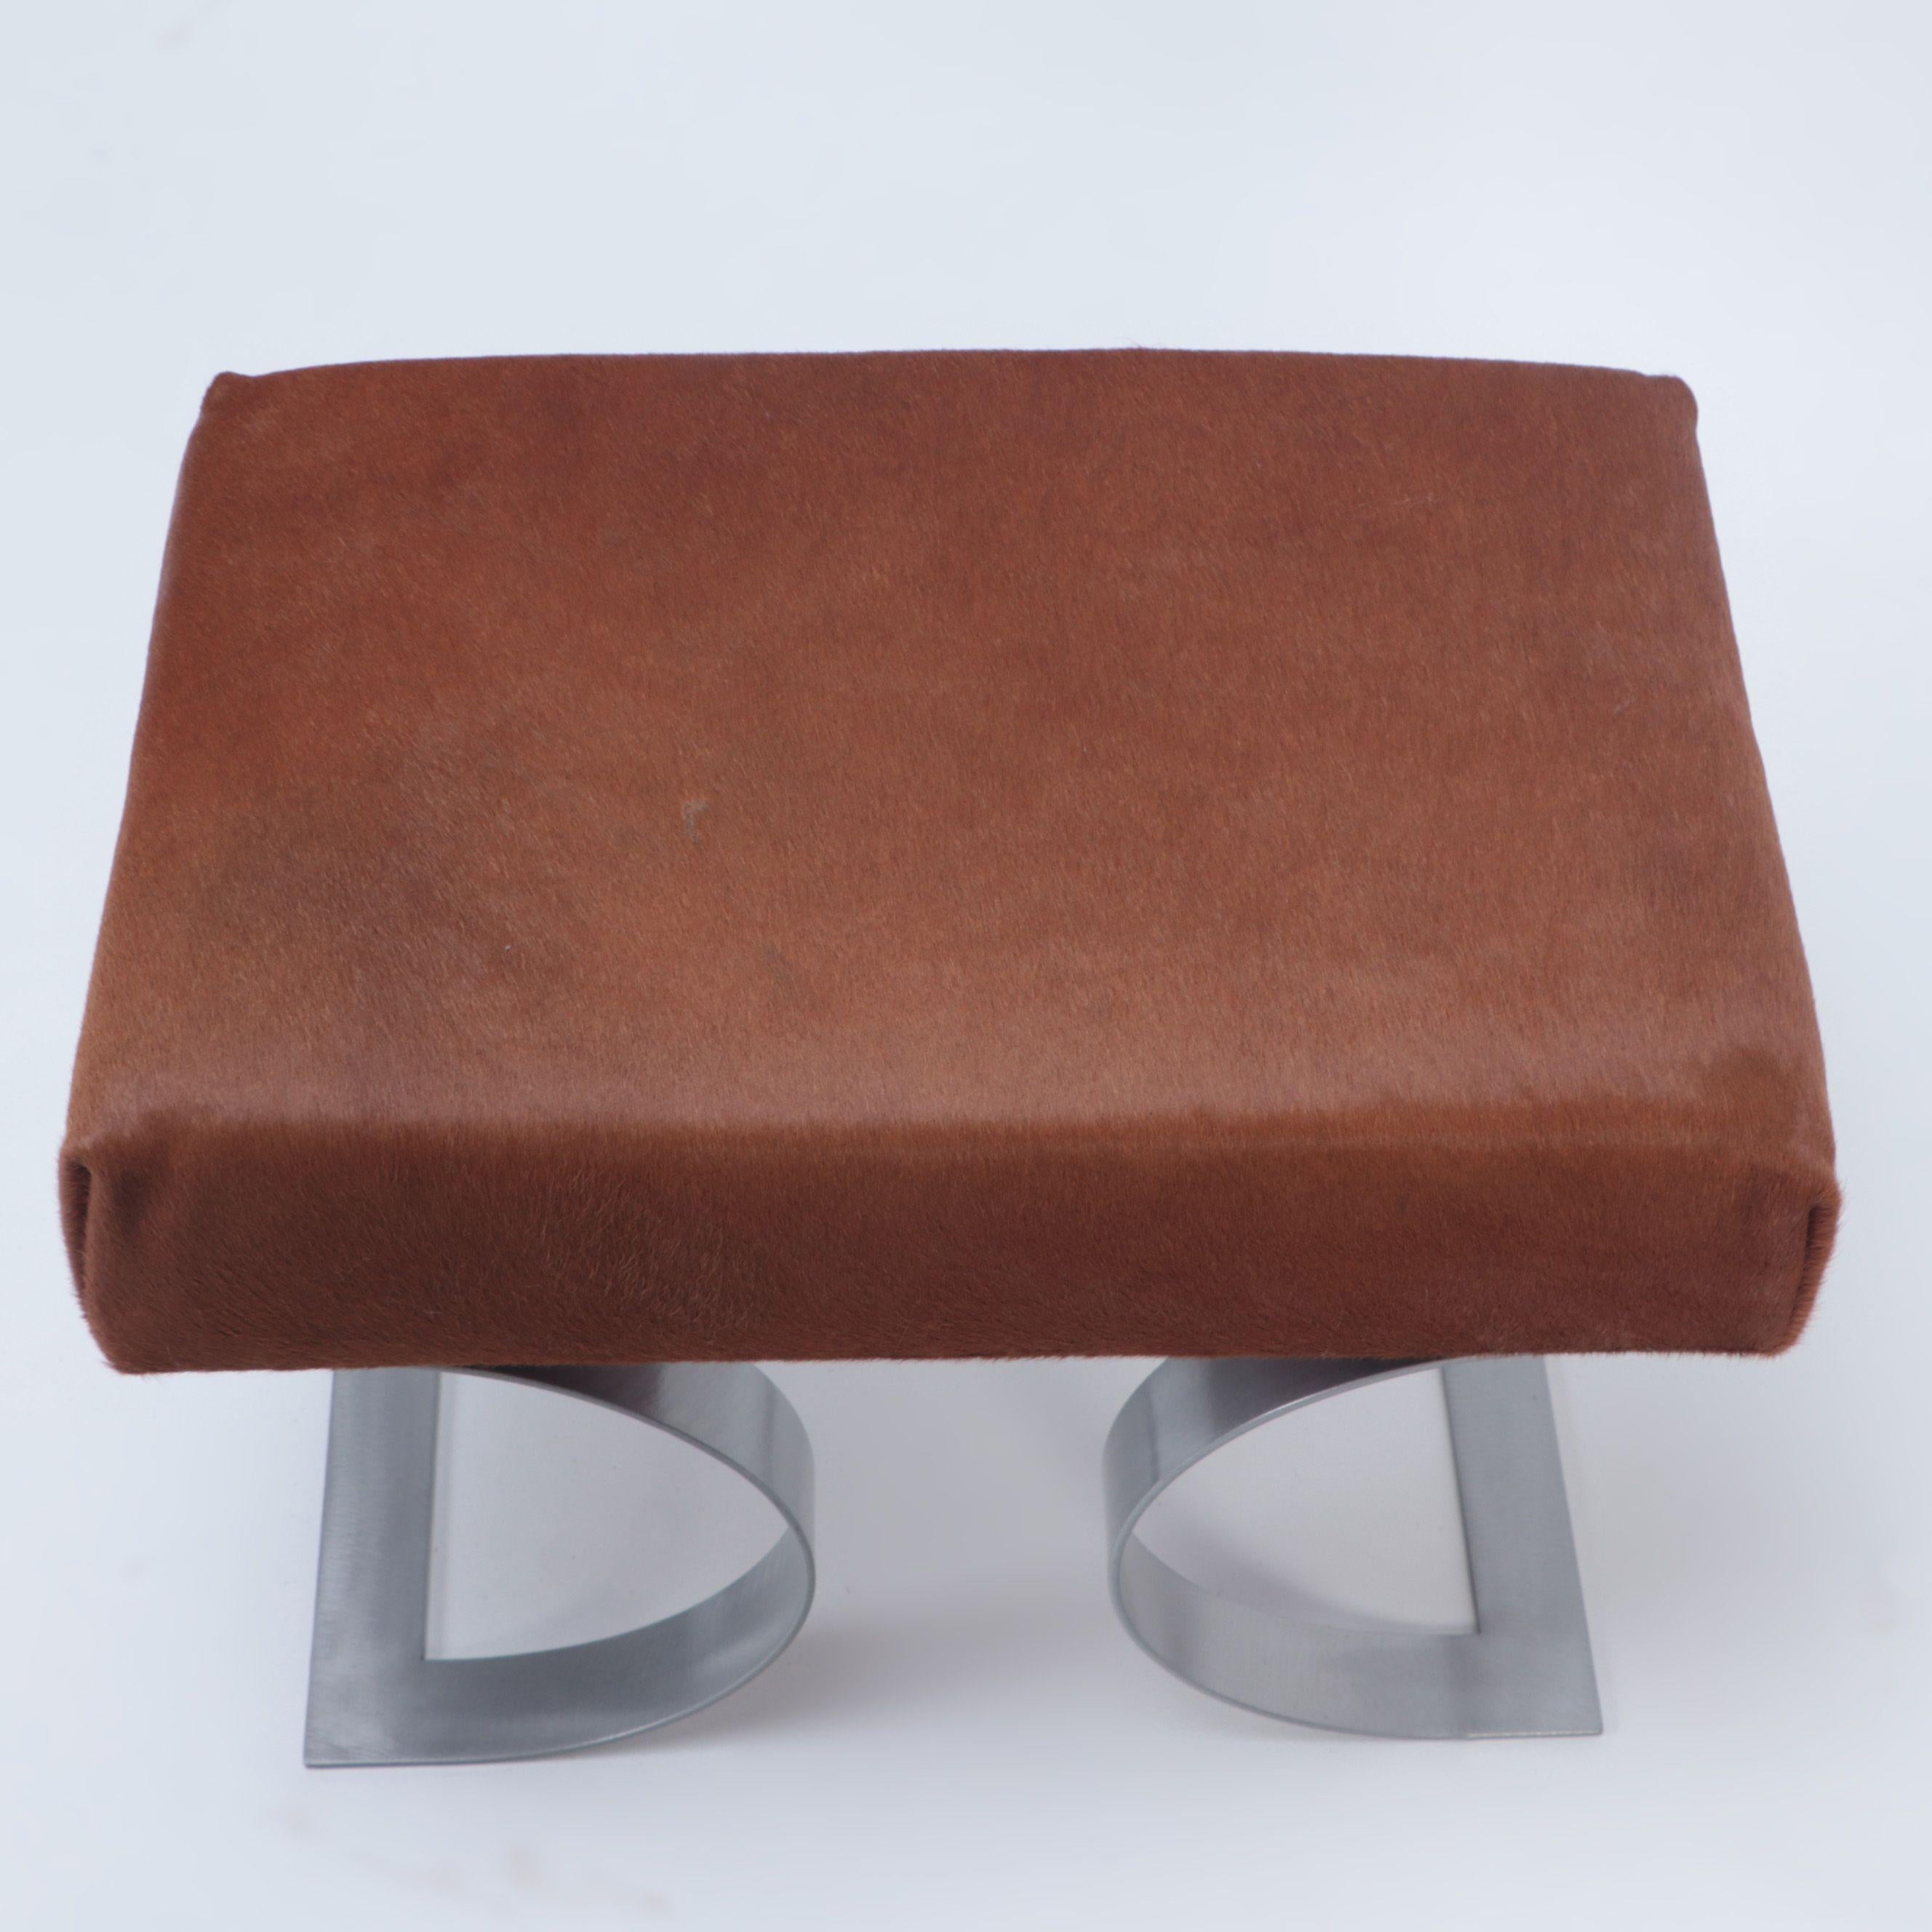 Metal Pair of Iron Benches Upholstered in Cowhide, Contemporary